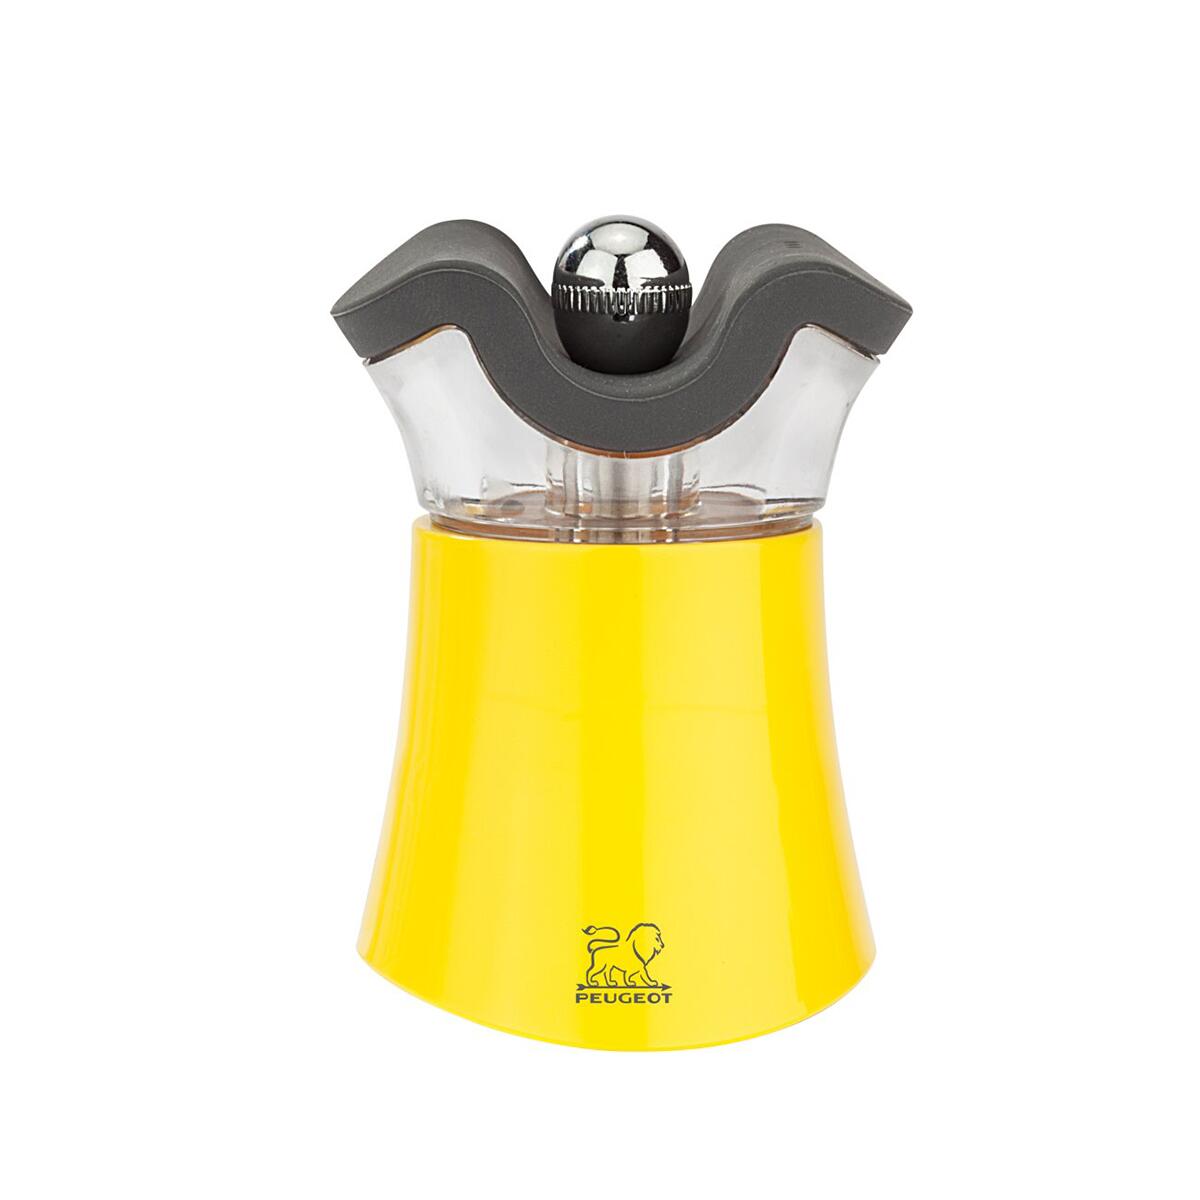 Peugeot Peps Combi 2 Function Black Pepper and Salt Mill Yellow